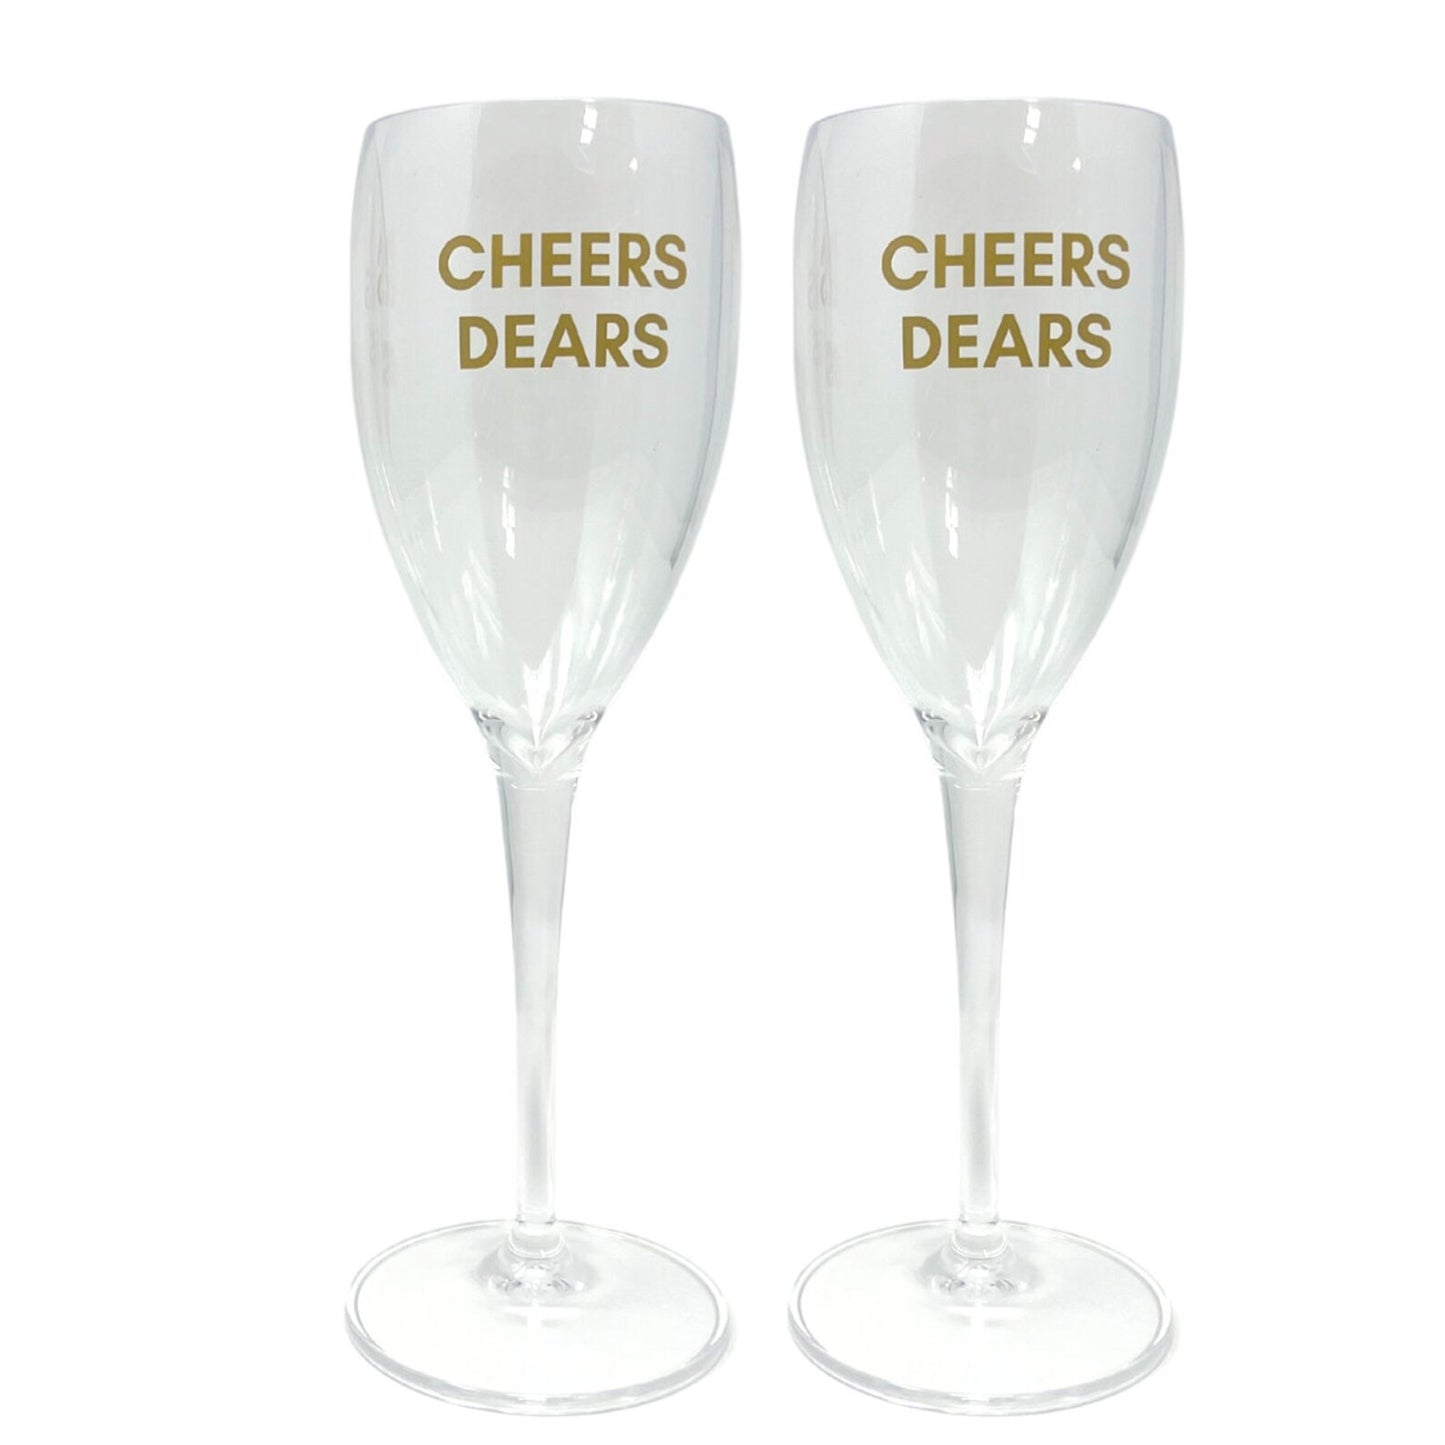 Cheers Dears Acrylic Champagne Flute